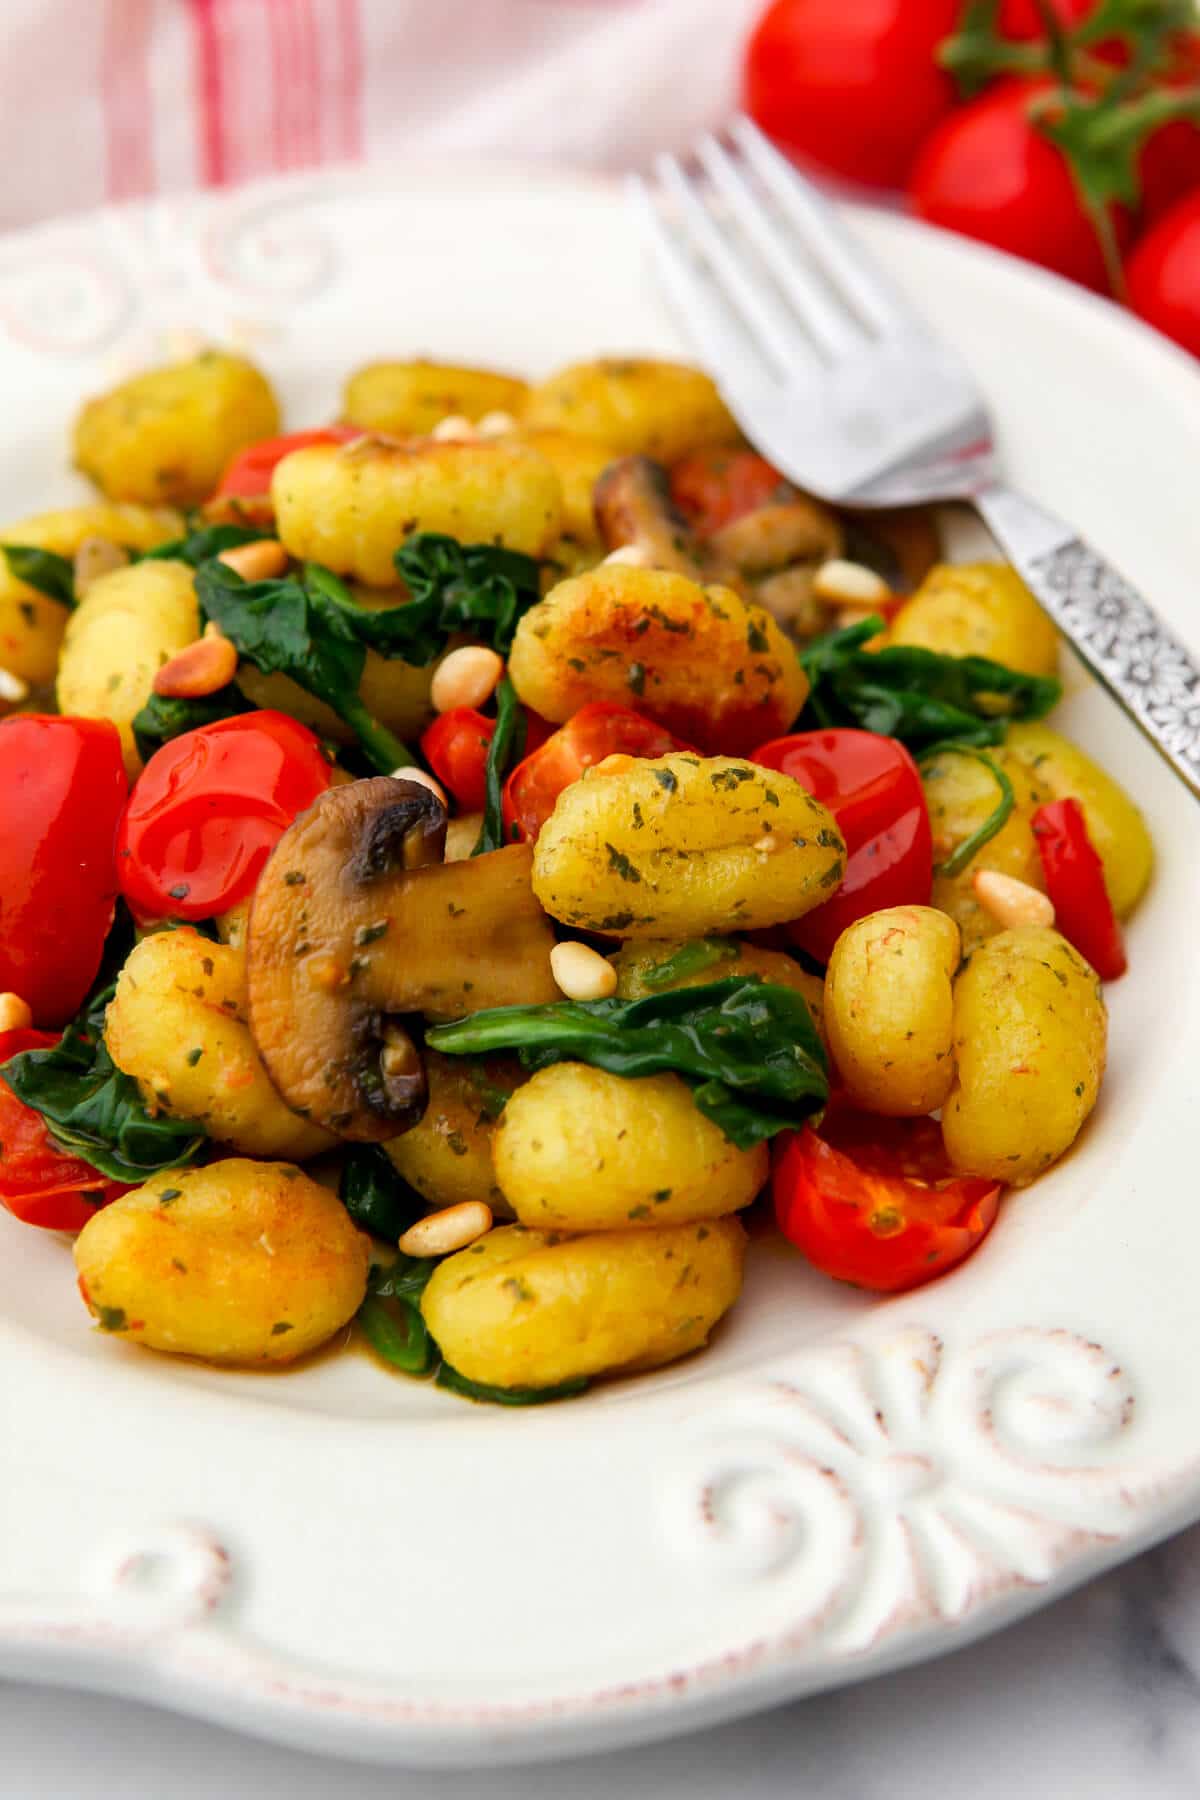 A  white plate full of fried gnocchi and colorful veggies with pine nuts sprinkled on top.